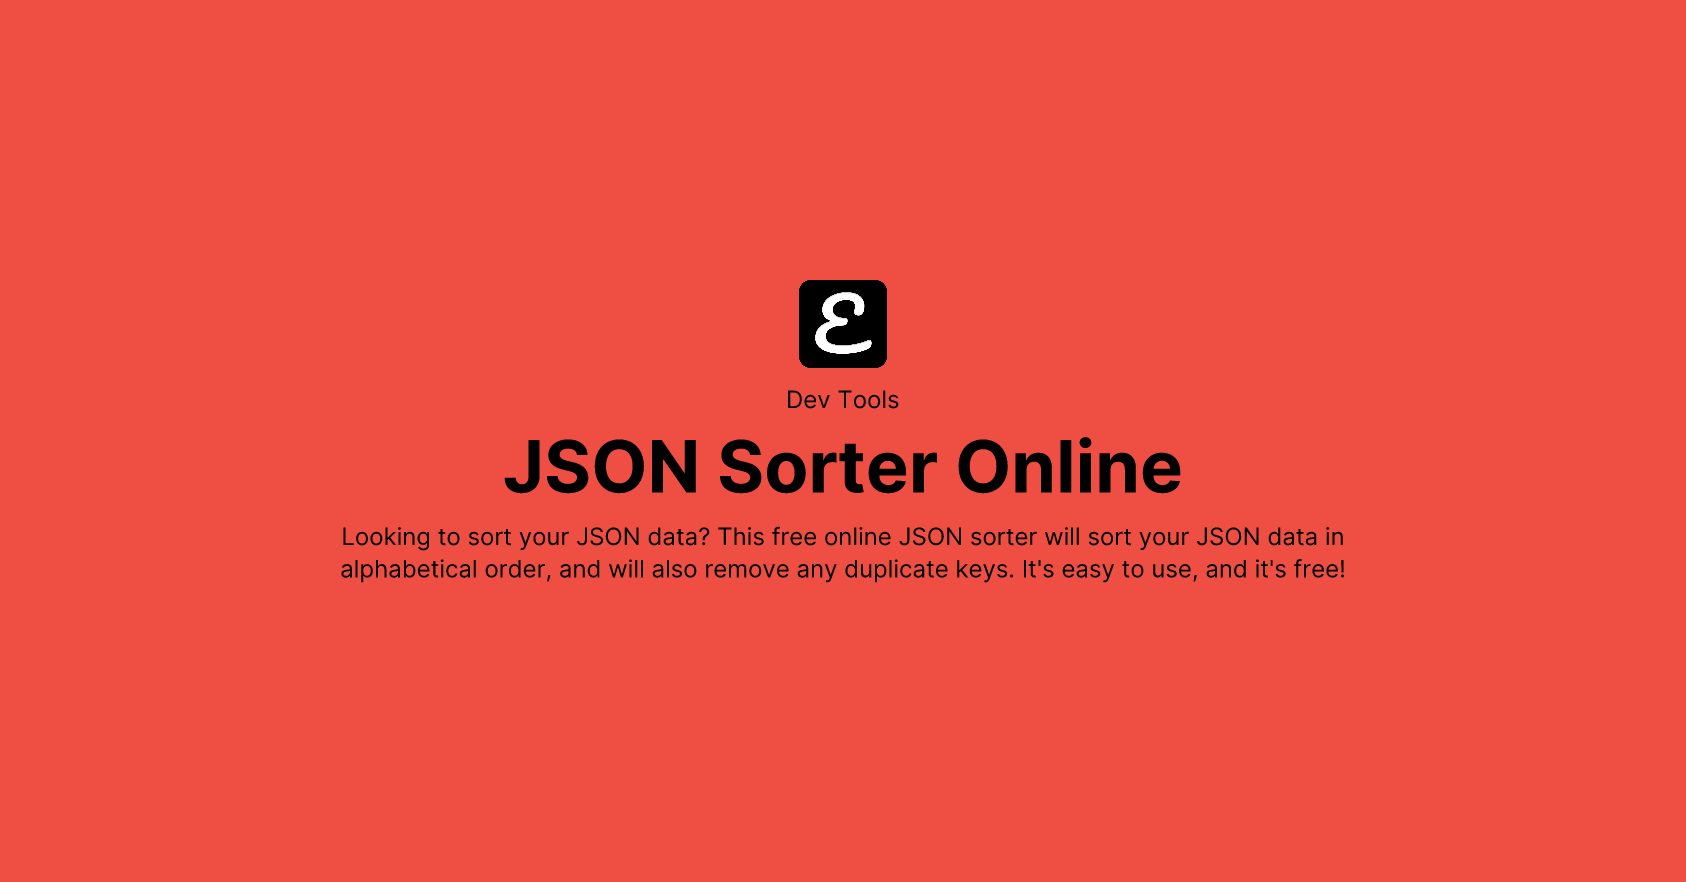 JSON Sorter Online by Eric David Smith